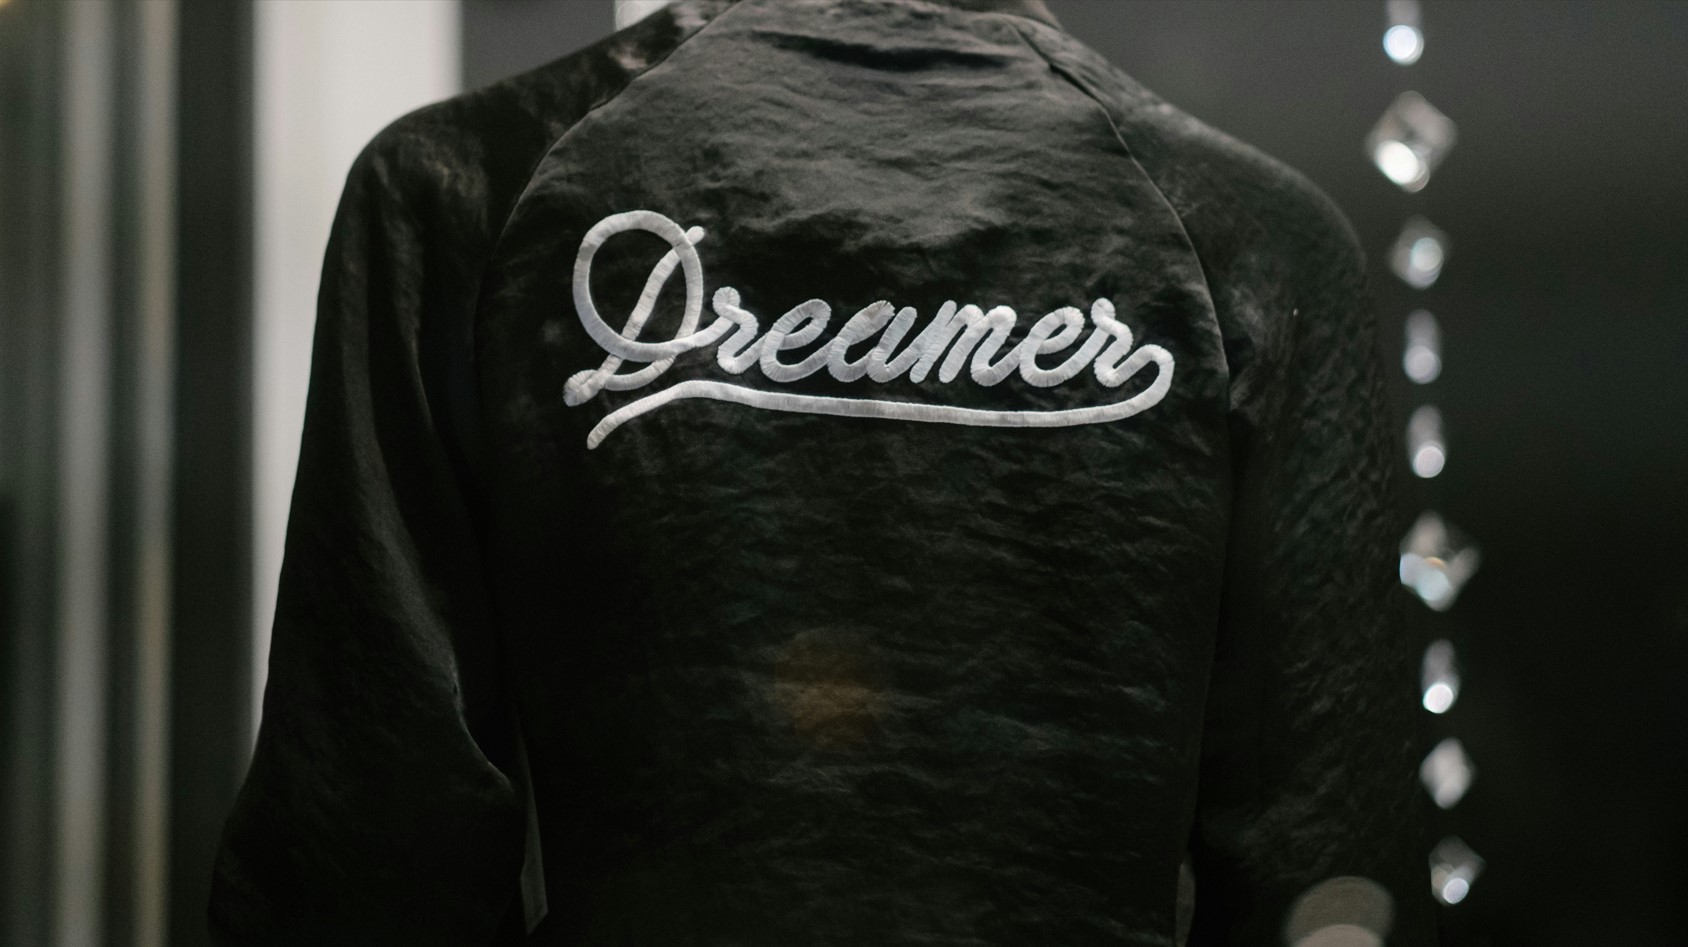 The image shows the back of a person wearing a black jacket with the word "Dreamer" written in white, cursive script across the upper back in reference to DACA. The setting appears to be indoors, with some decorative hanging elements visible in the blurred background.